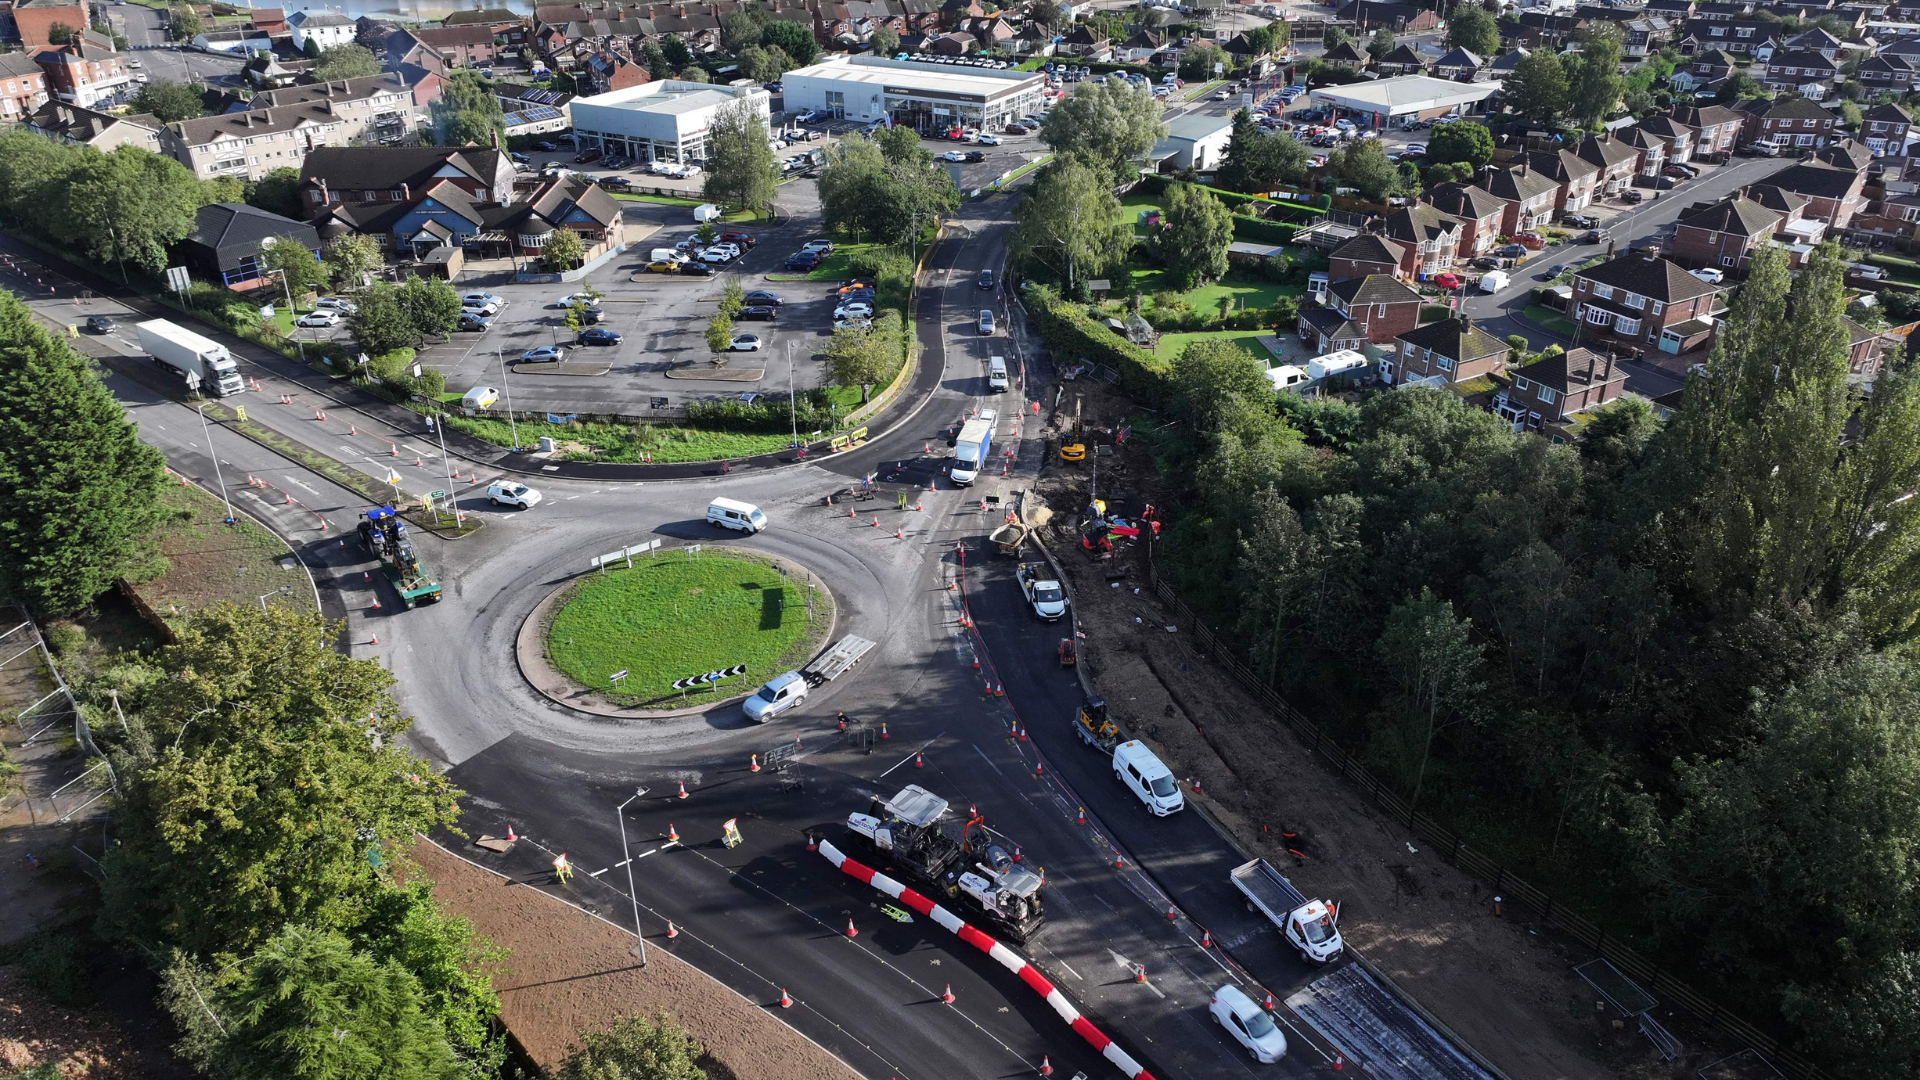 A birds eye view of the Marsh Lane roundabout